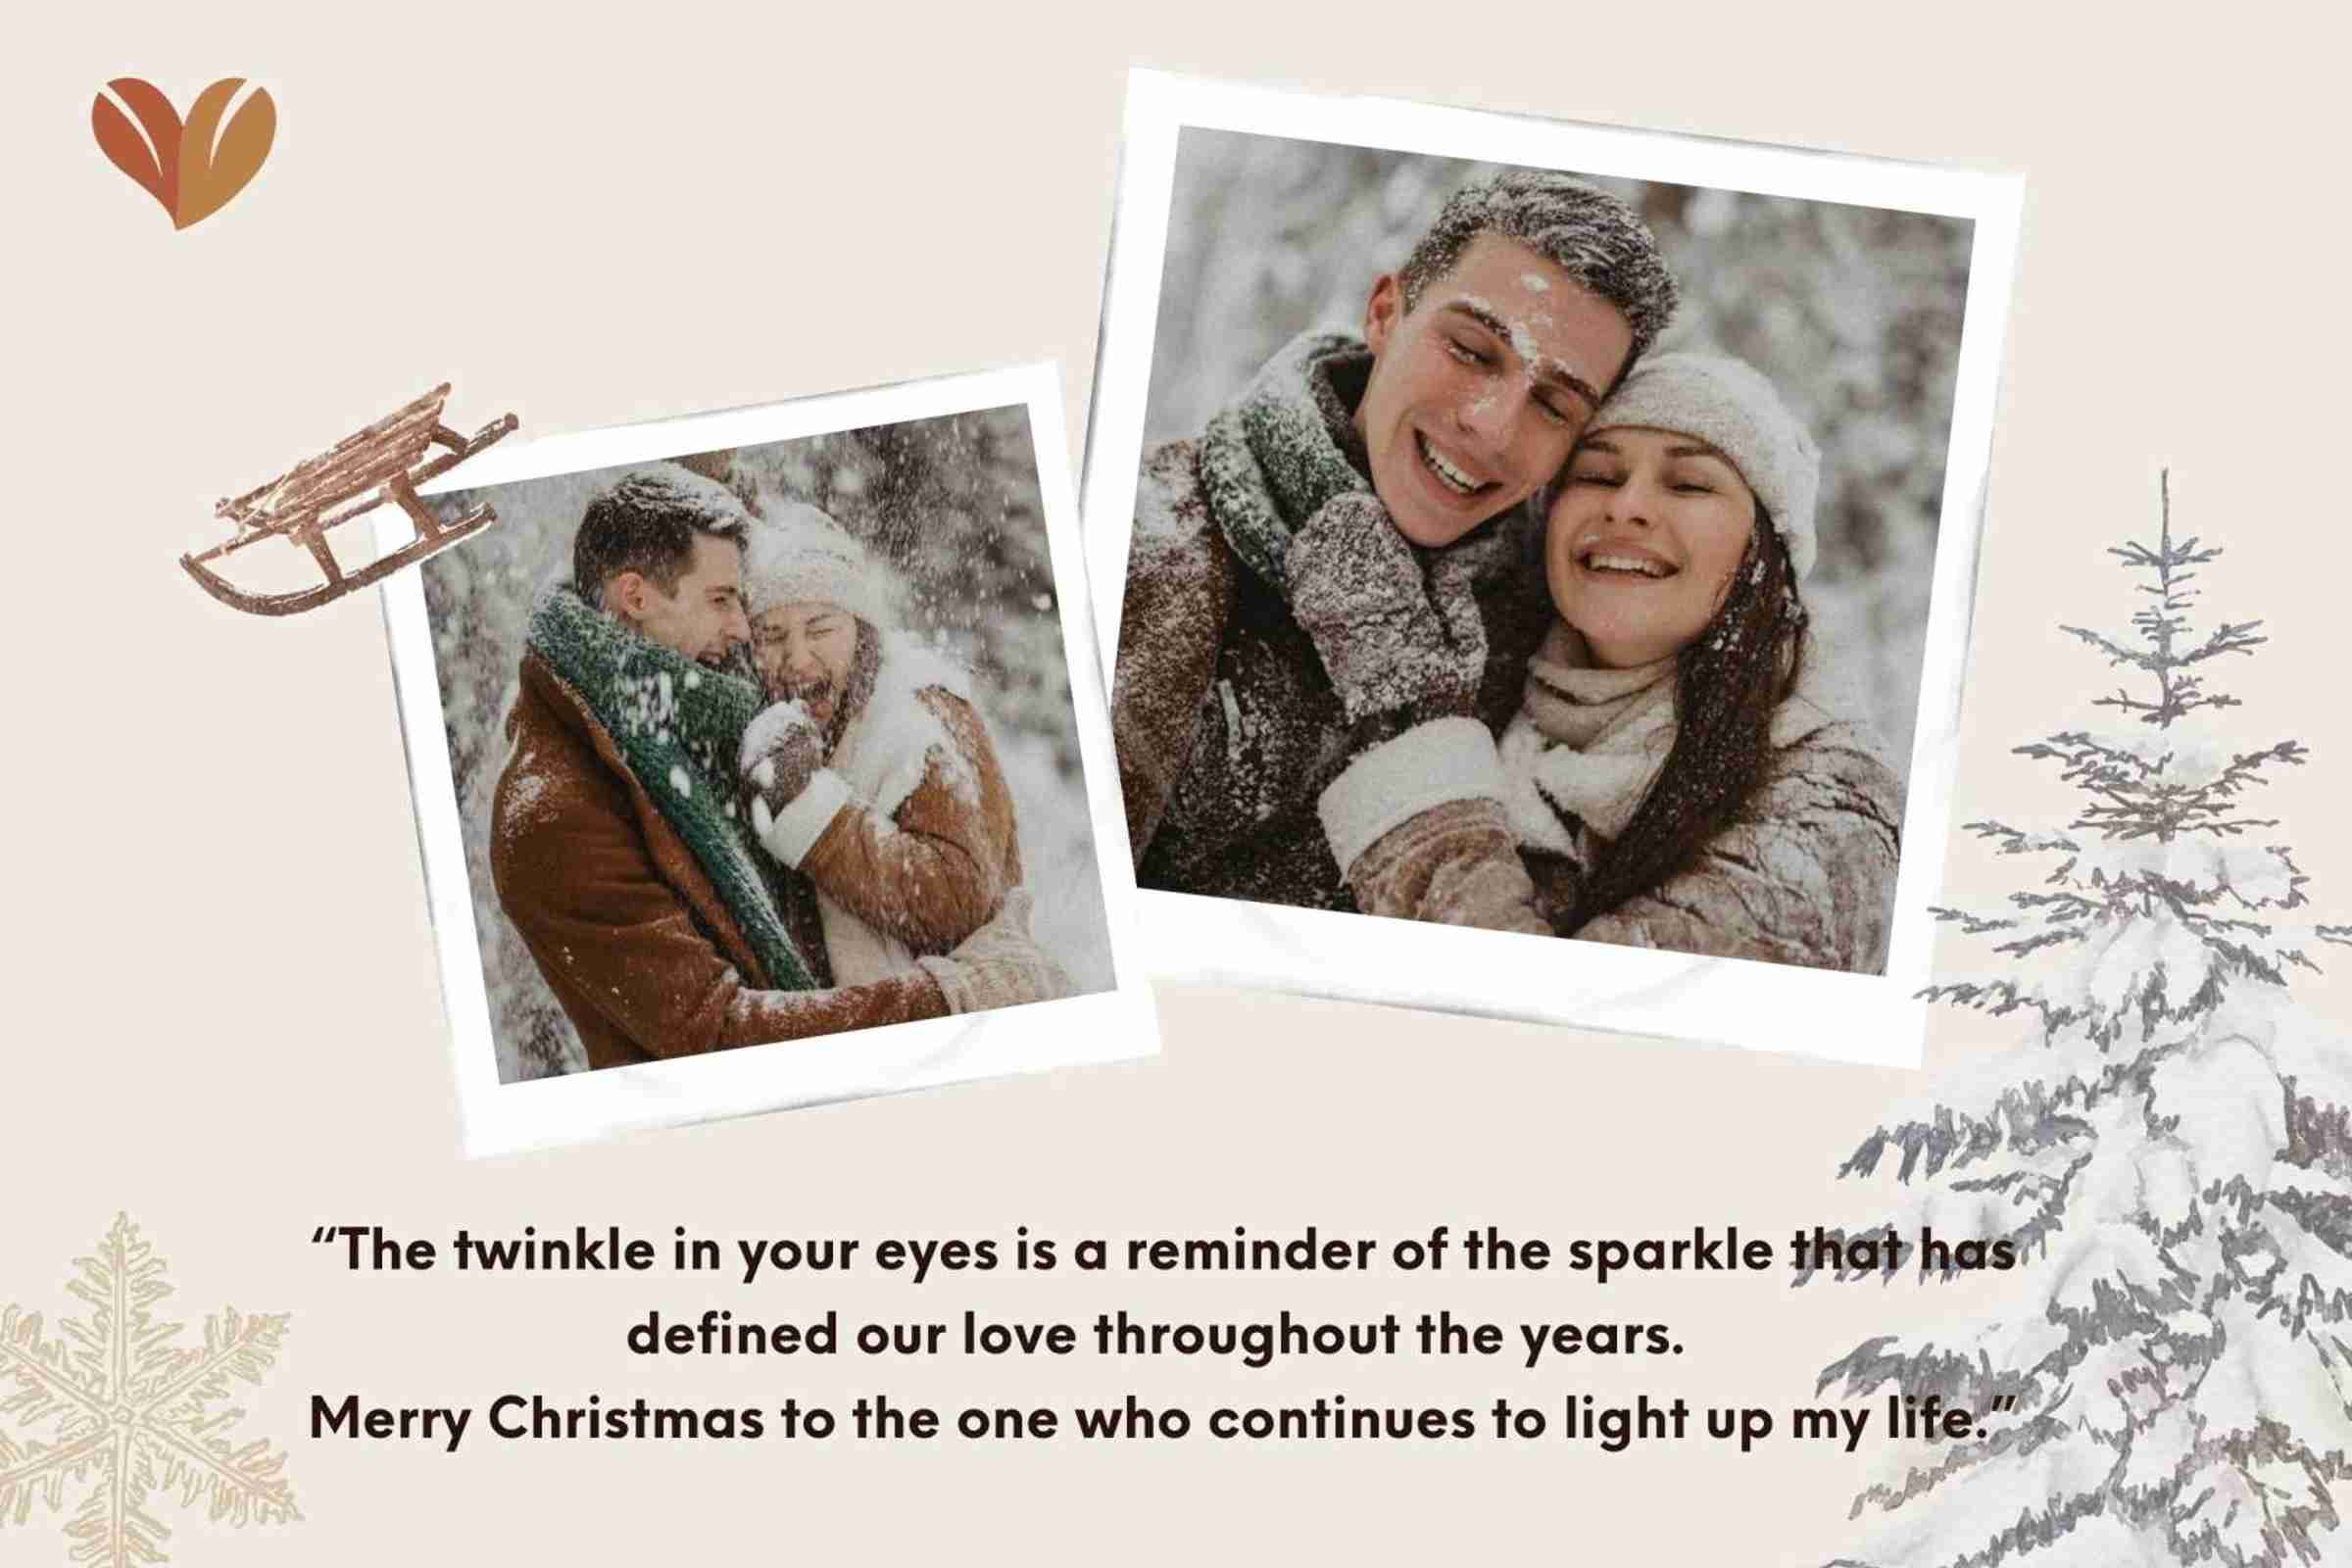 “The twinkle in your eyes is a reminder of the sparkle that has defined our love throughout the years. Merry Christmas to the one who continues to light up my life.”